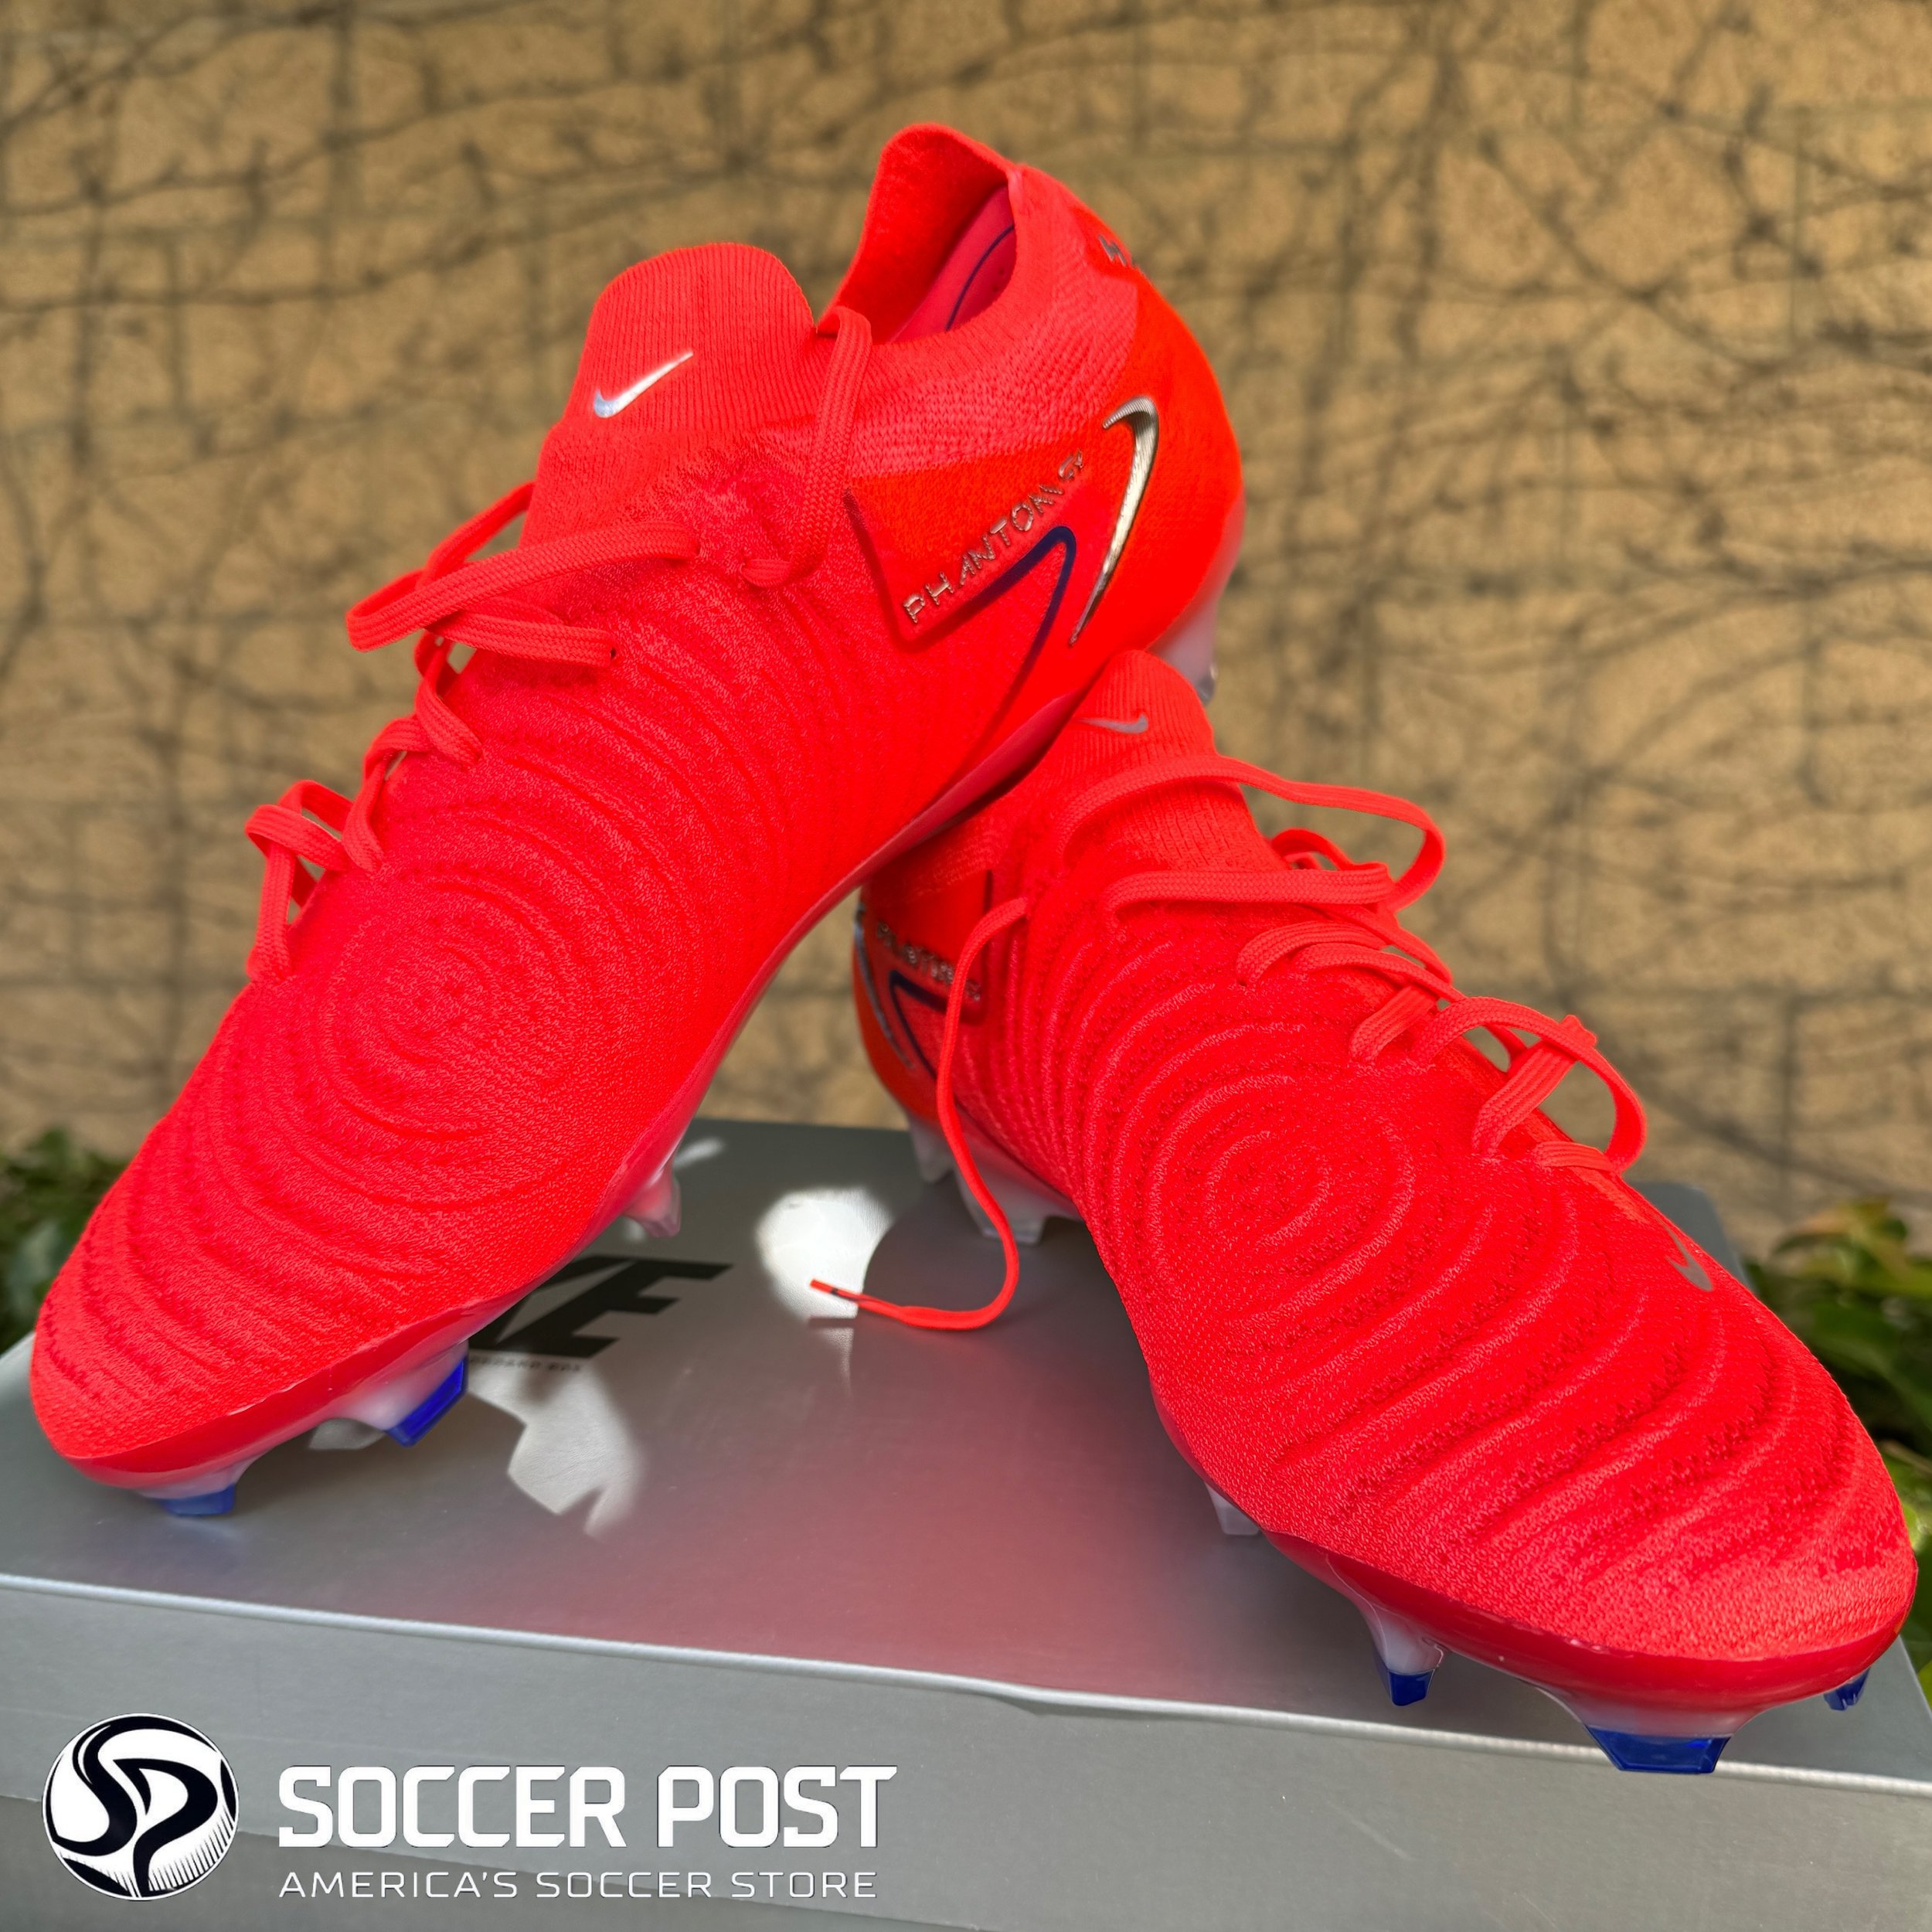 ICYMI: The #Nike Phantom GX II &ldquo;EH9&rdquo; signature boots, are in stock now, at Soccer Post.
⚽️
6929 N. Willow Ave. STE 109 #Fresno, CA
⚽️
#Clovis #Madera #Sanger